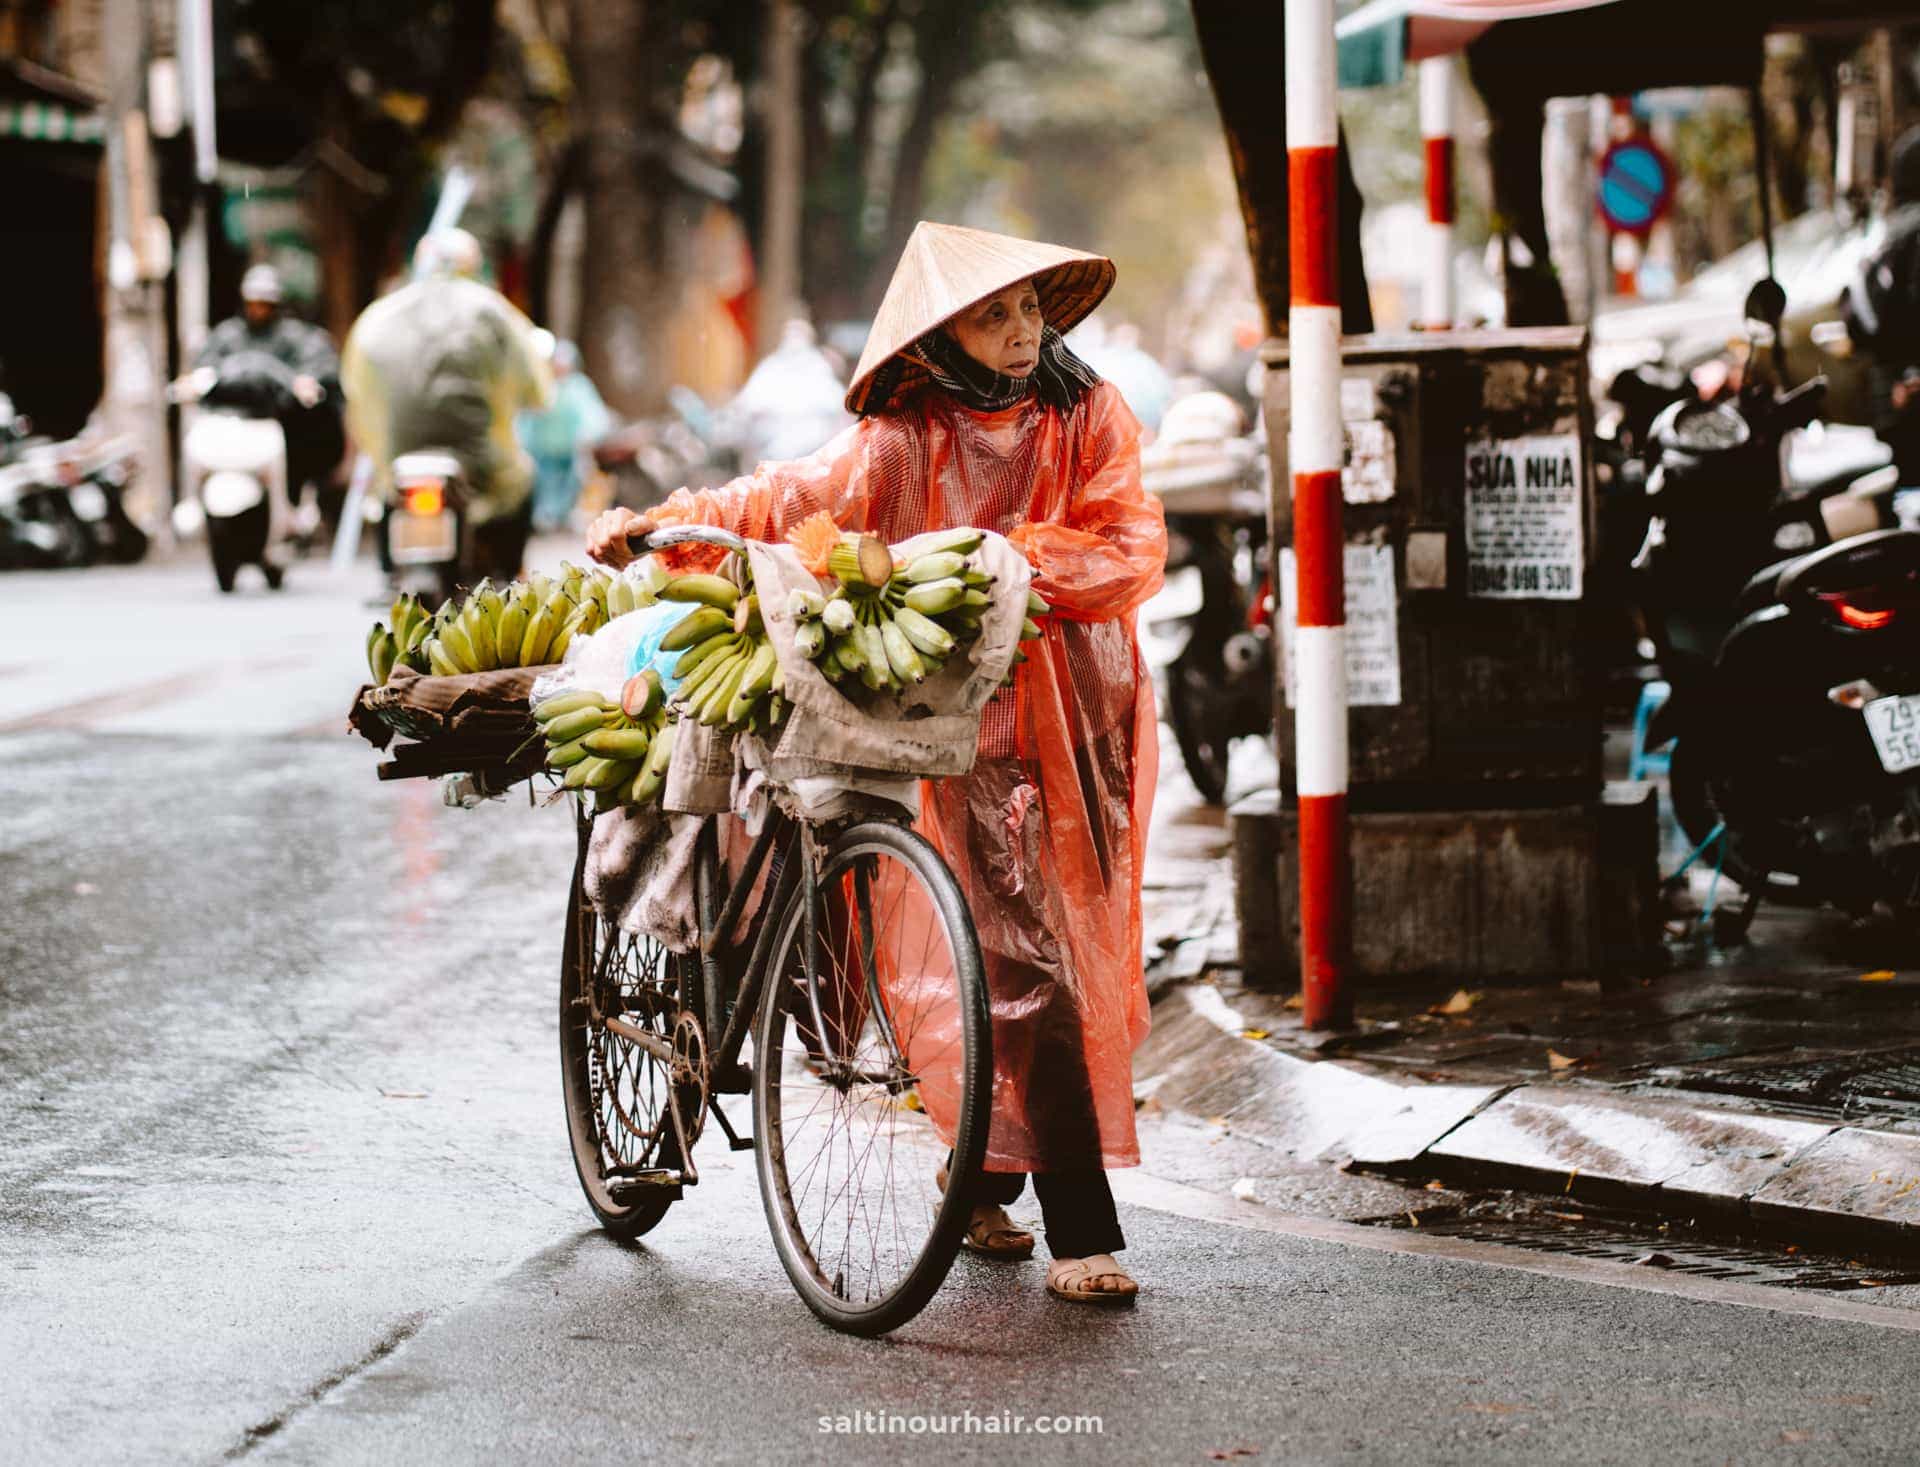 No time to chat in Hanoi